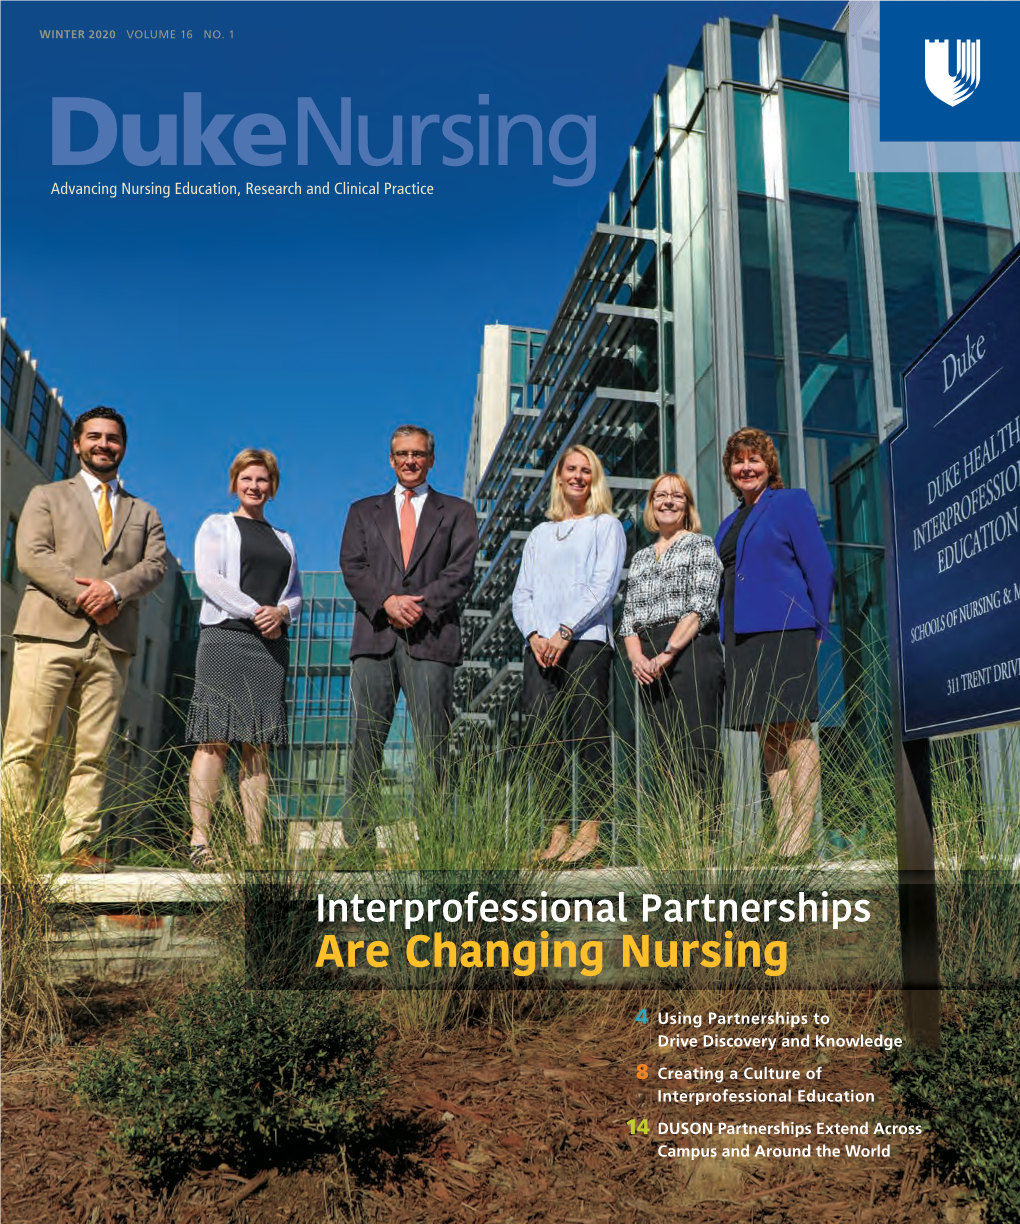 Dukenursing Advancing Nursing Education, Research and Clinical Practice